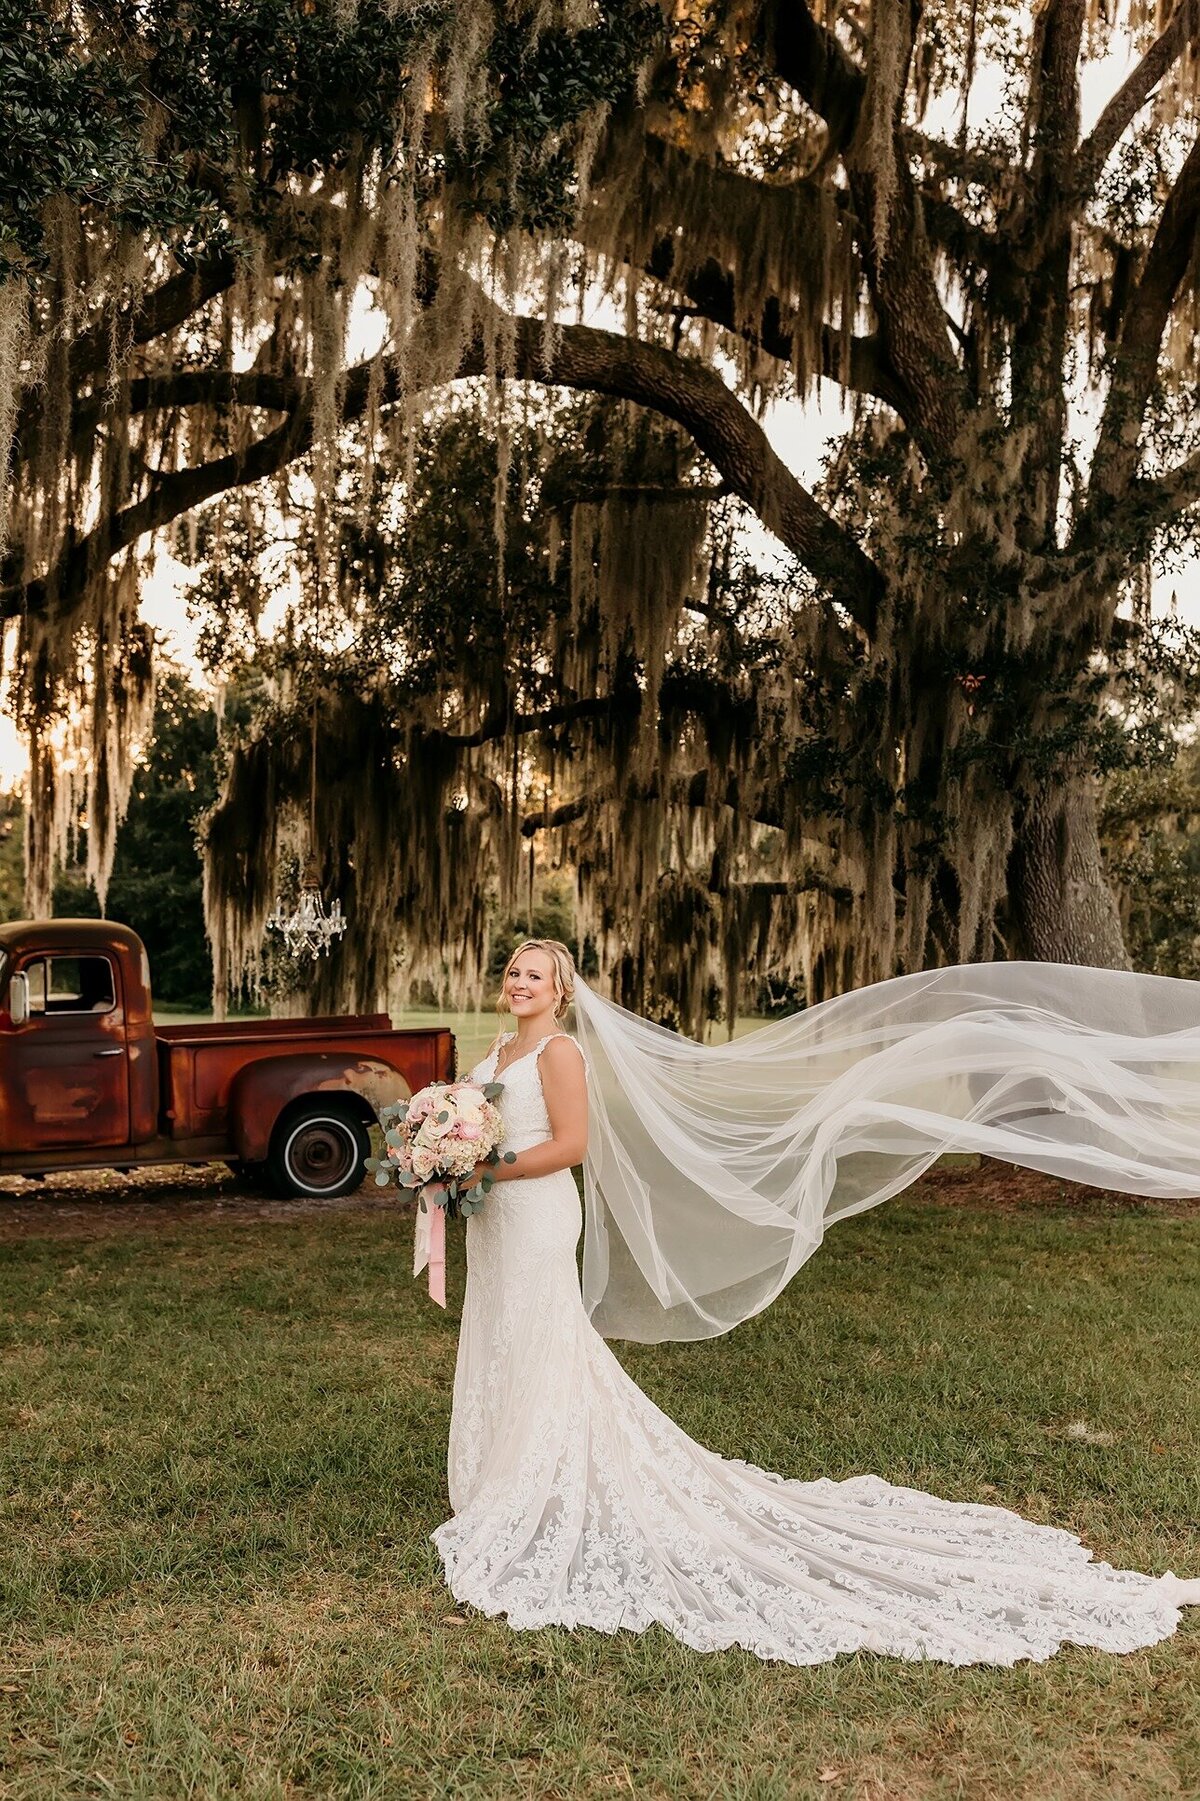 Legacy at Oak Meadows Wedding Venue - Pierson - Gainesville Florida - Weddings and Events25